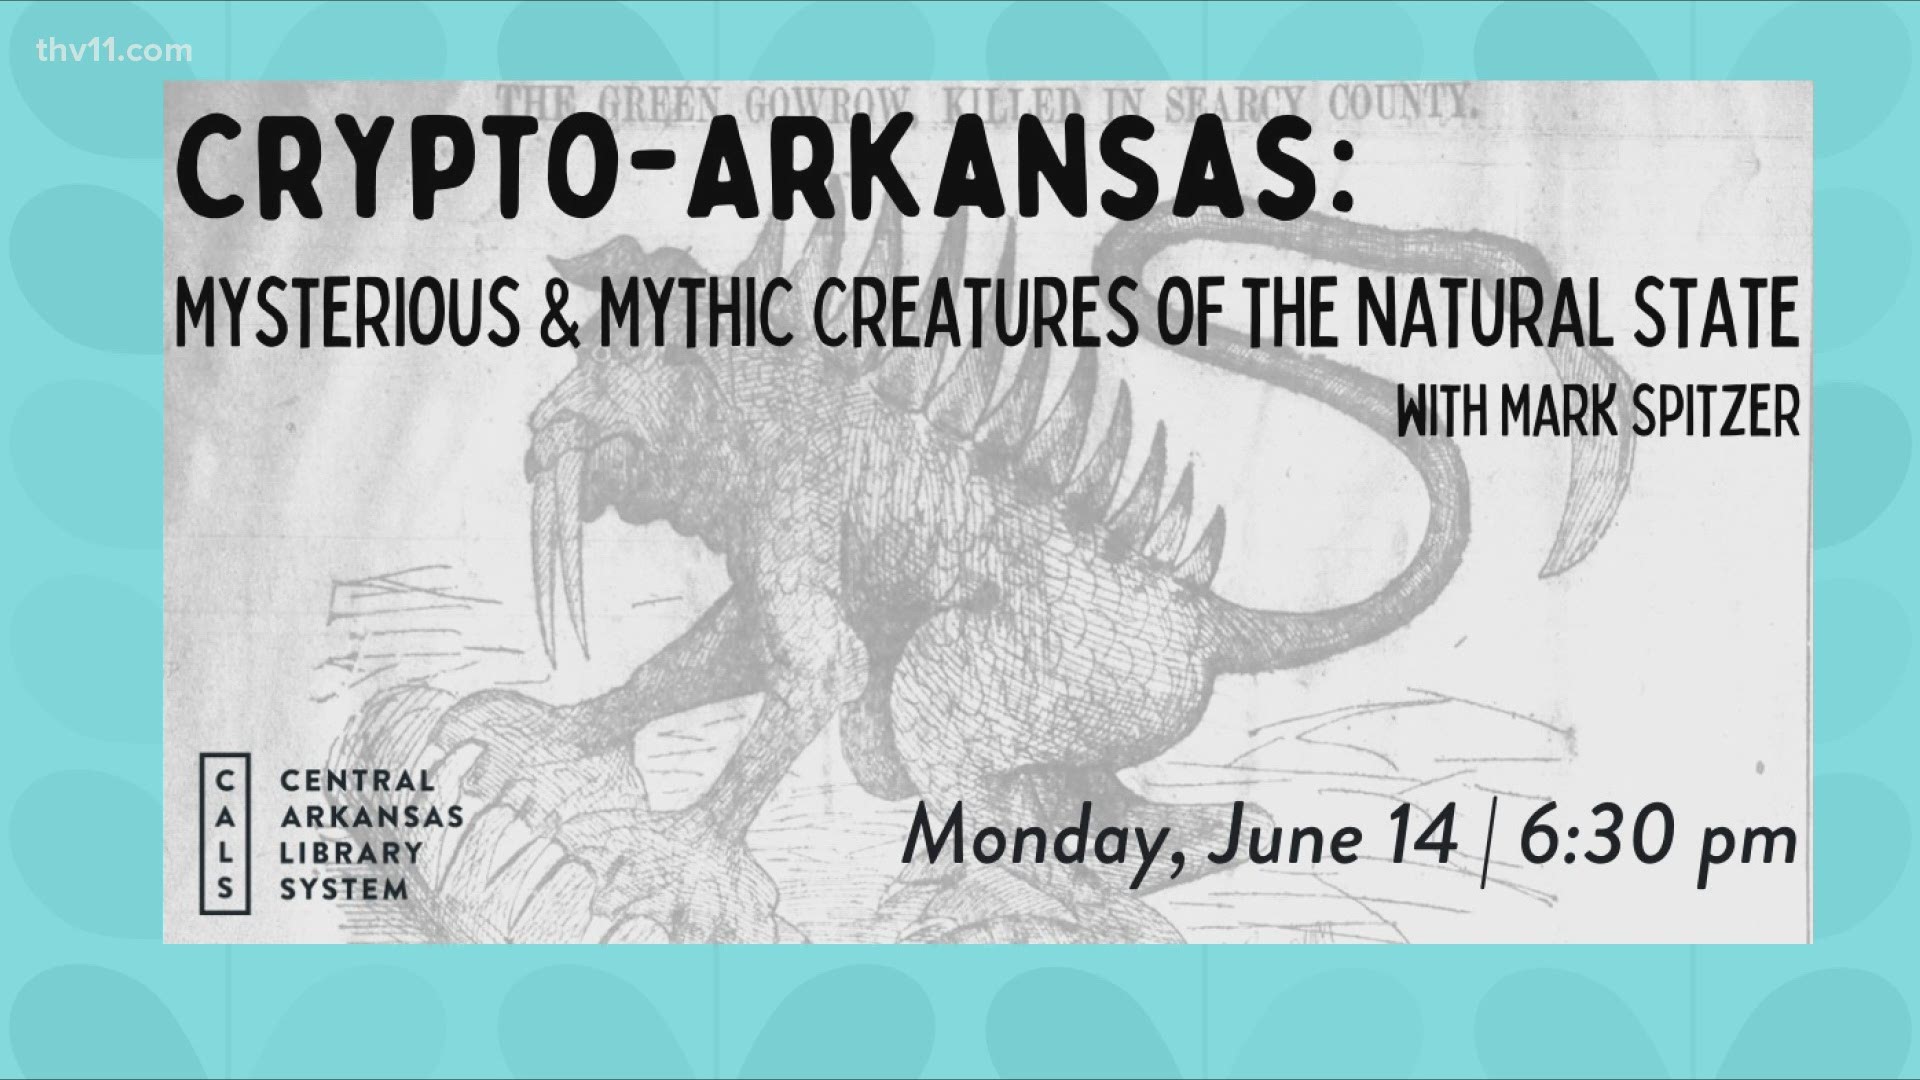 Join 'monsterologist' Mark Spitzer for 'Crypto-Arkansas: Mysterious and Mythic Creatures of the Natural State' on June 14. Register here: https://bit.ly/3cu4fQC